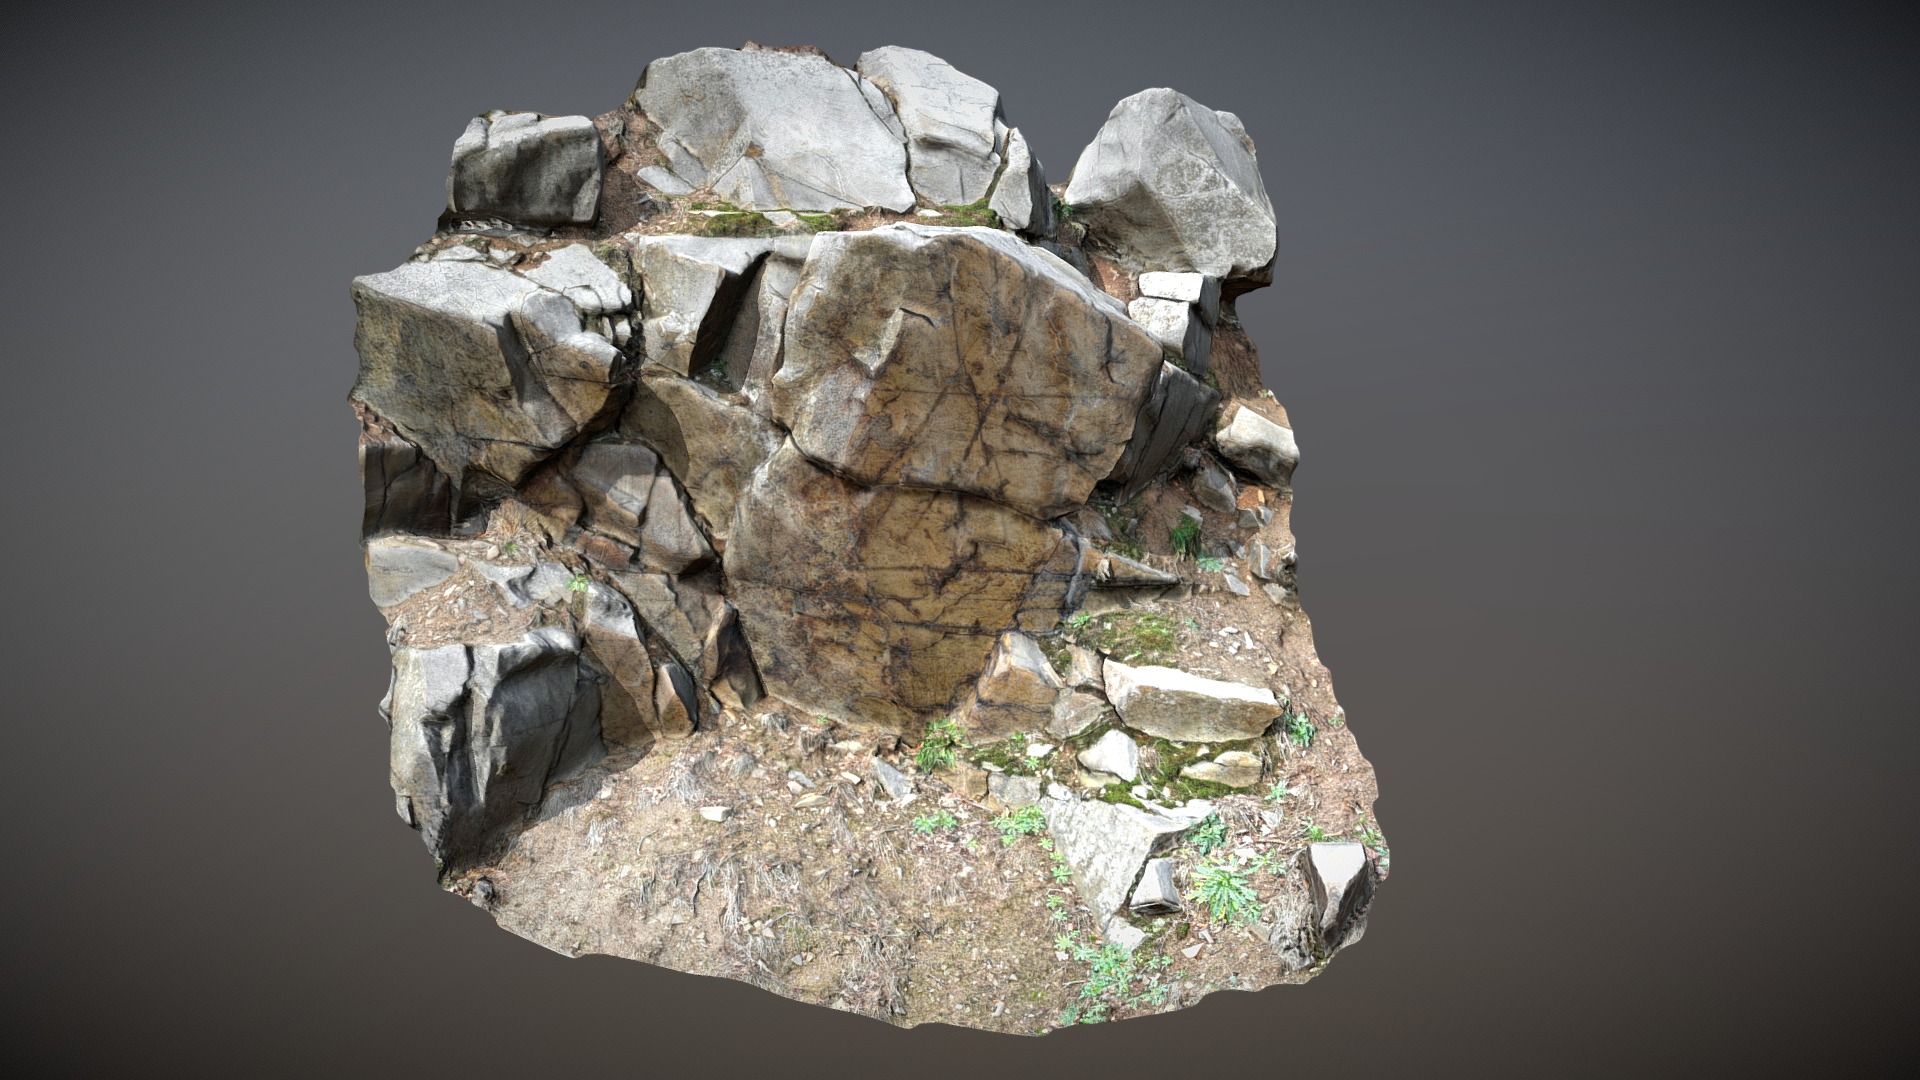 3D model 3d scanned cliff face H - This is a 3D model of the 3d scanned cliff face H. The 3D model is about a rock formation with moss growing on it.